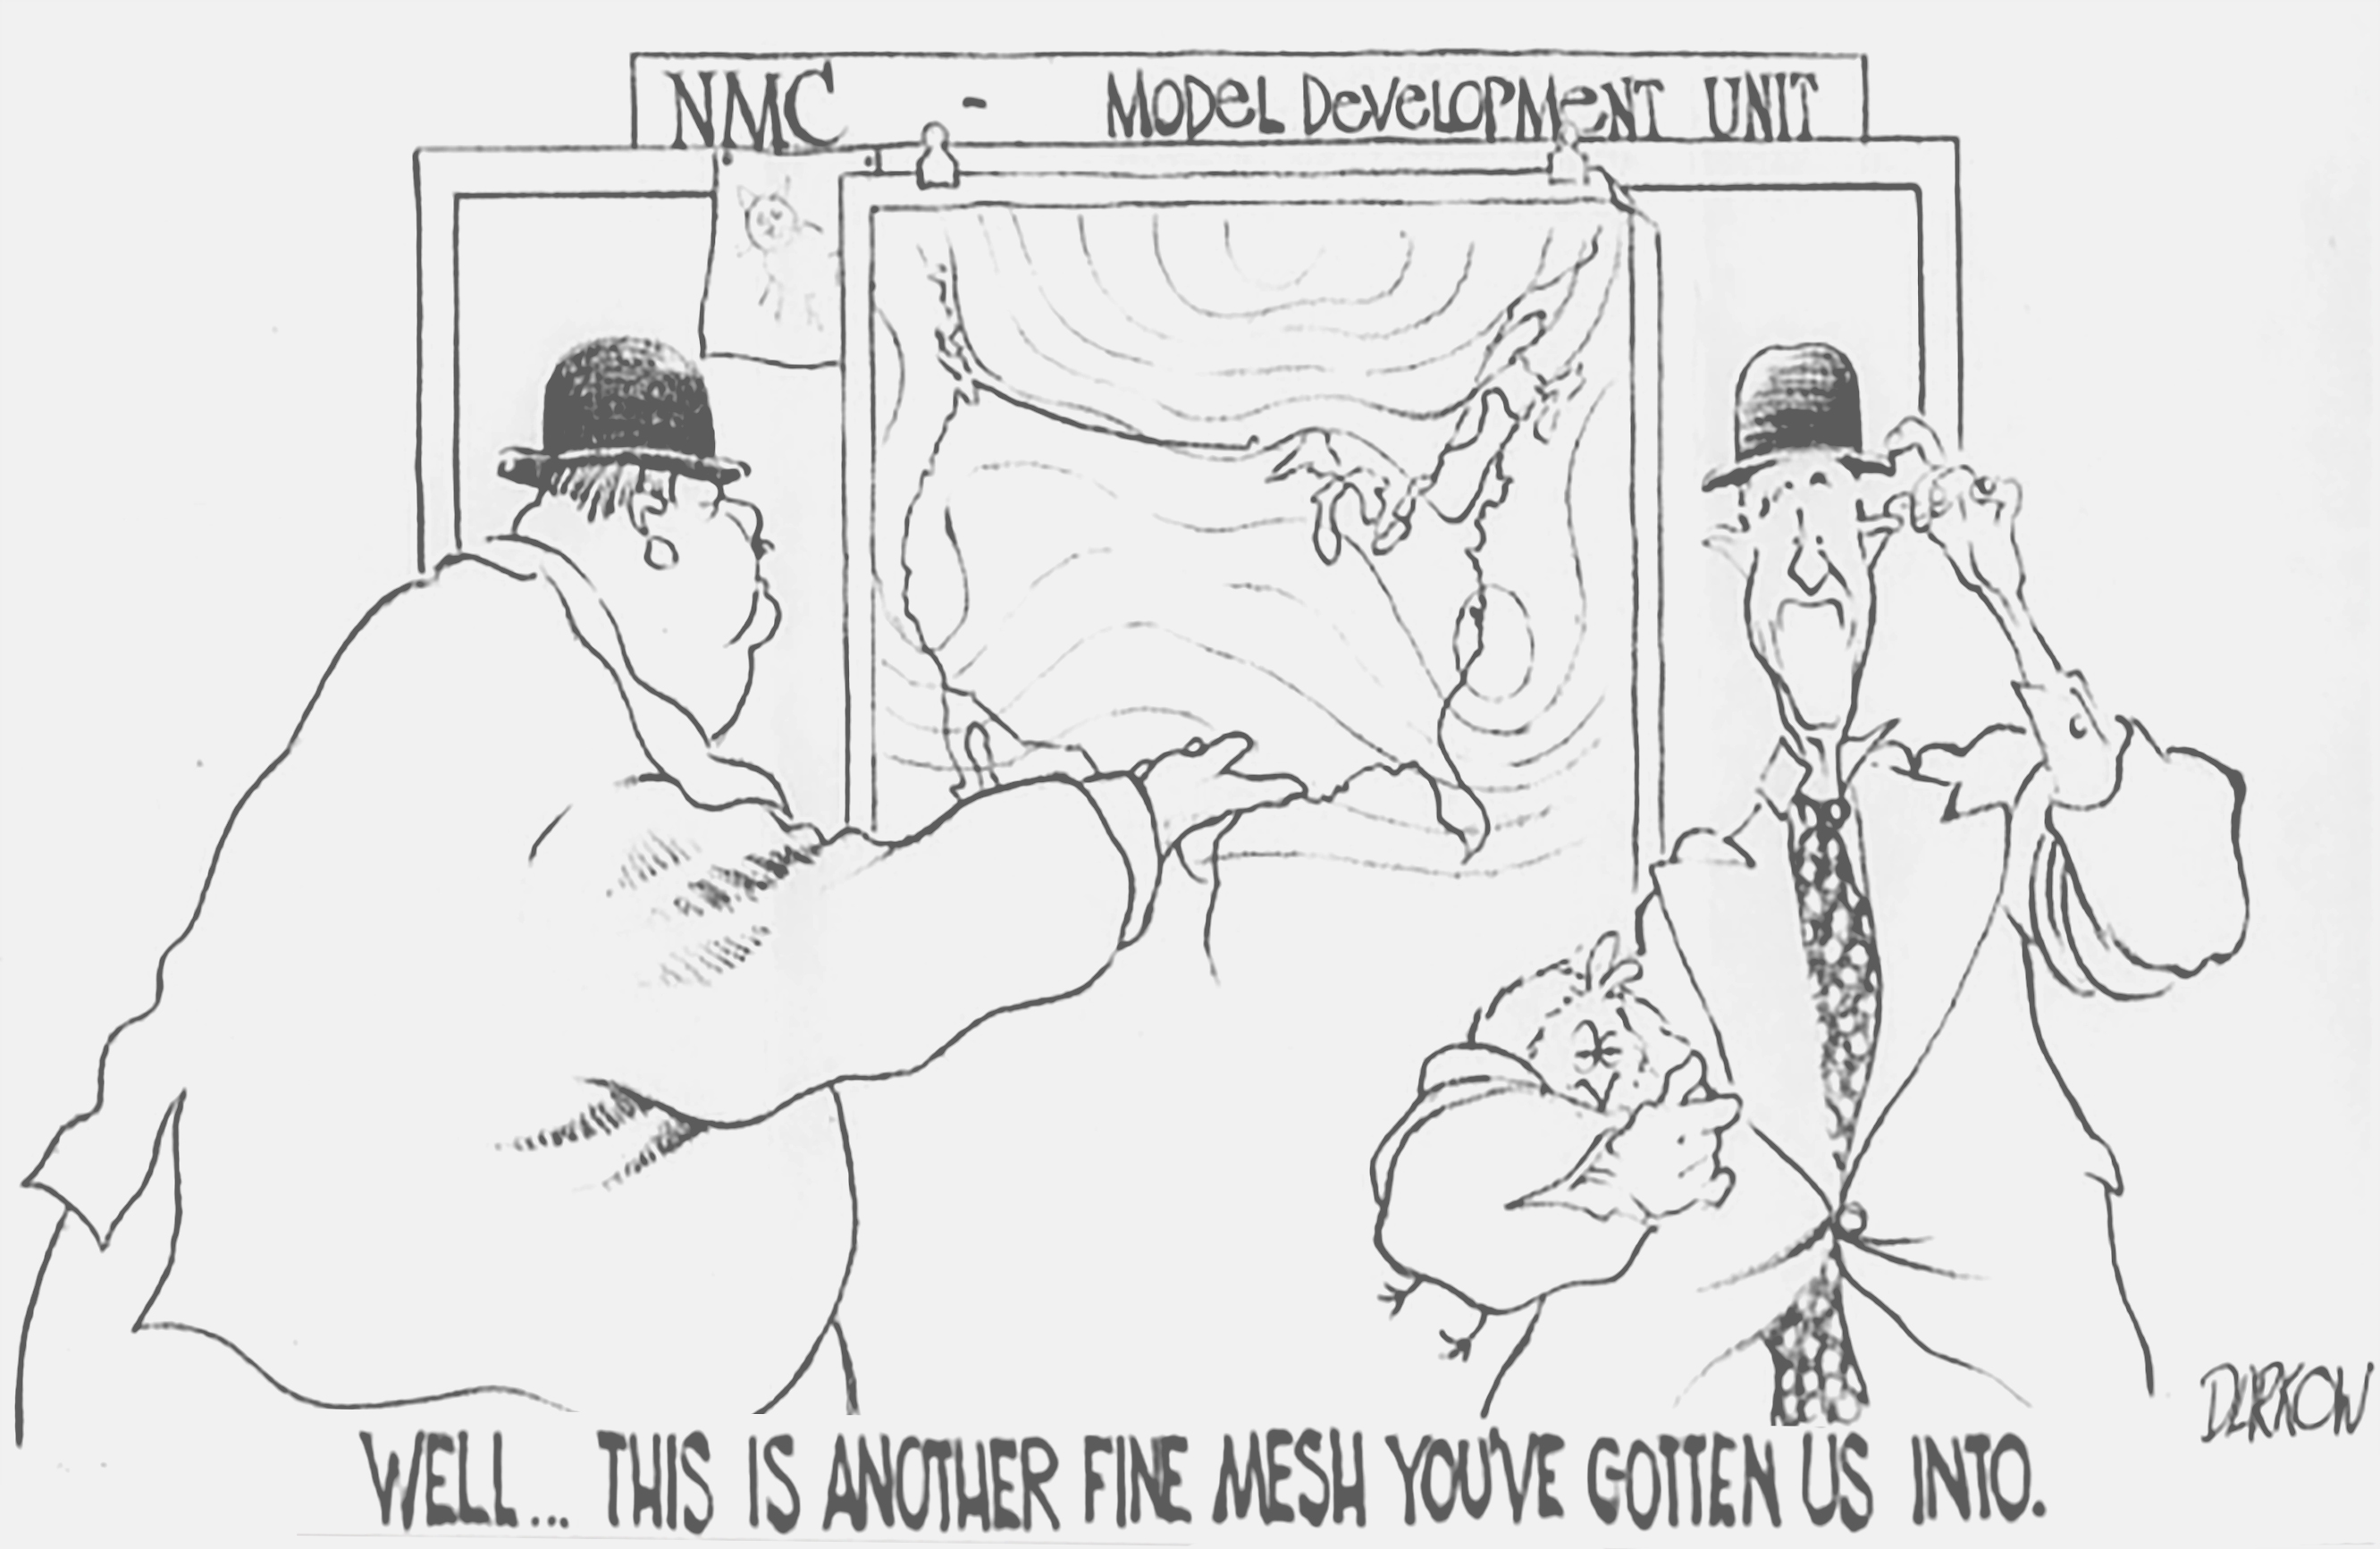 Cartoon published in the 1970s